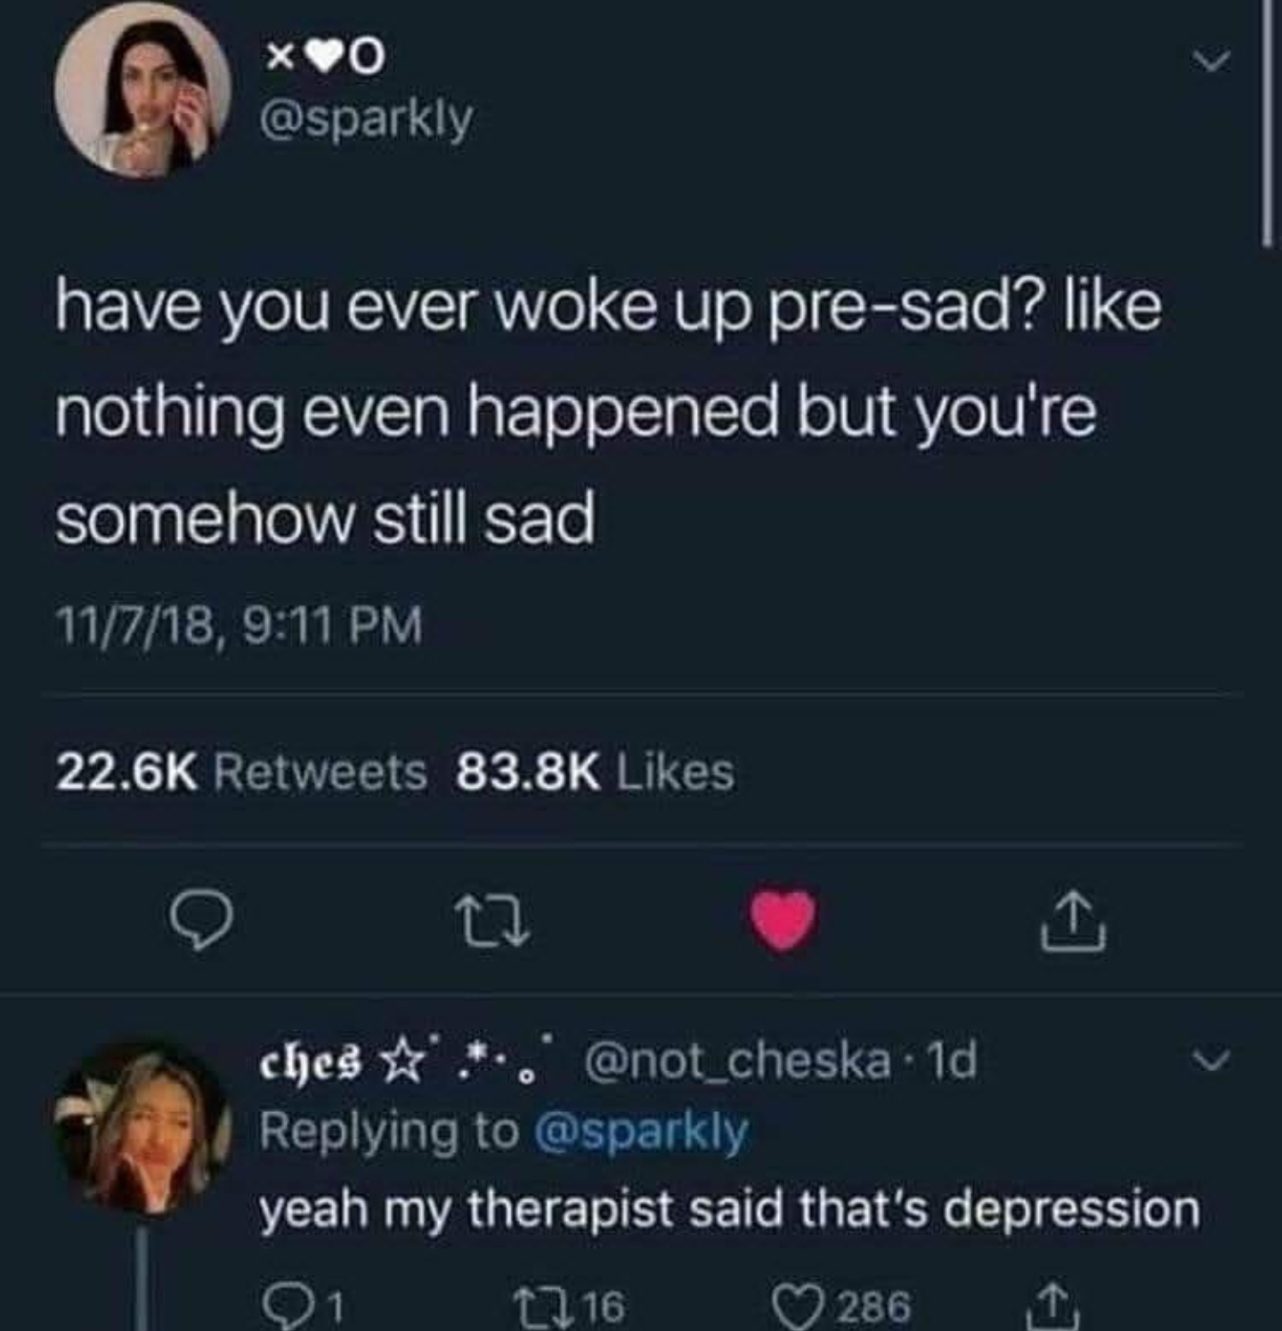 screenshot - a som have you ever woke up presad? nothing even happened but you're somehow still sad 11718, ches ..' 10 yeah my therapist said that's depression Q1 2716 2861